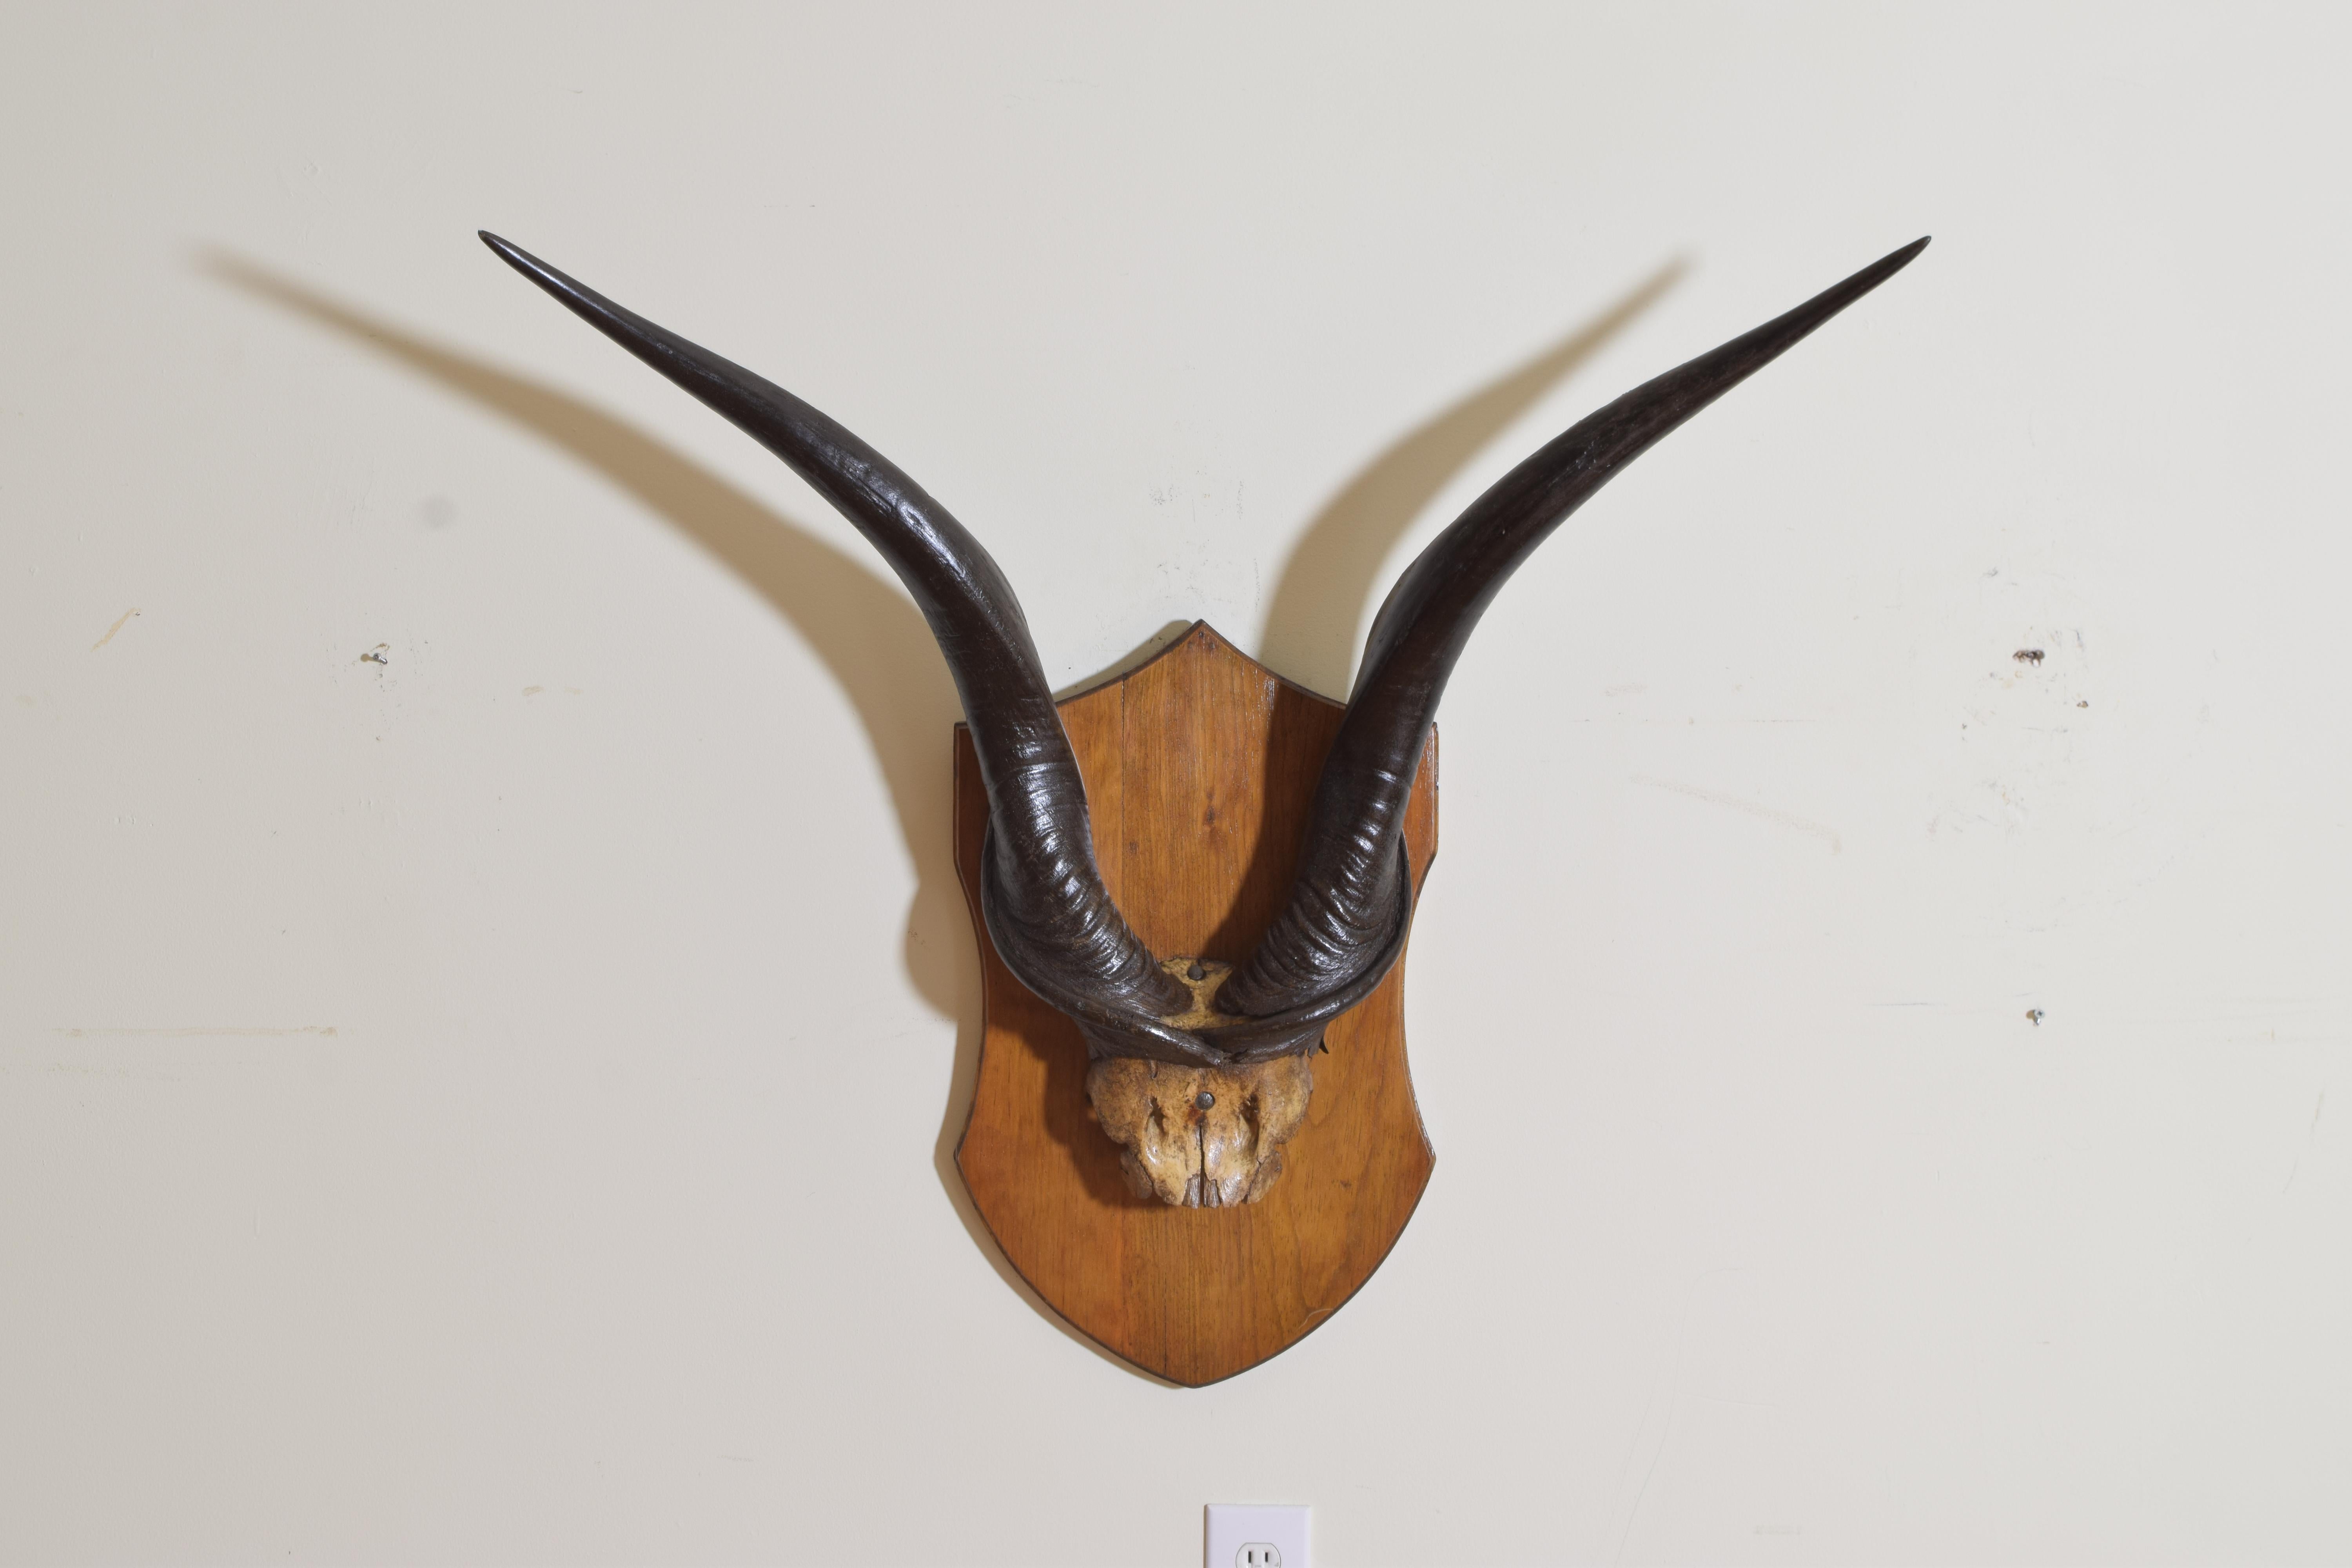 Slightly splayed Eland horn and partial skull mounted on shaped oak plaque.